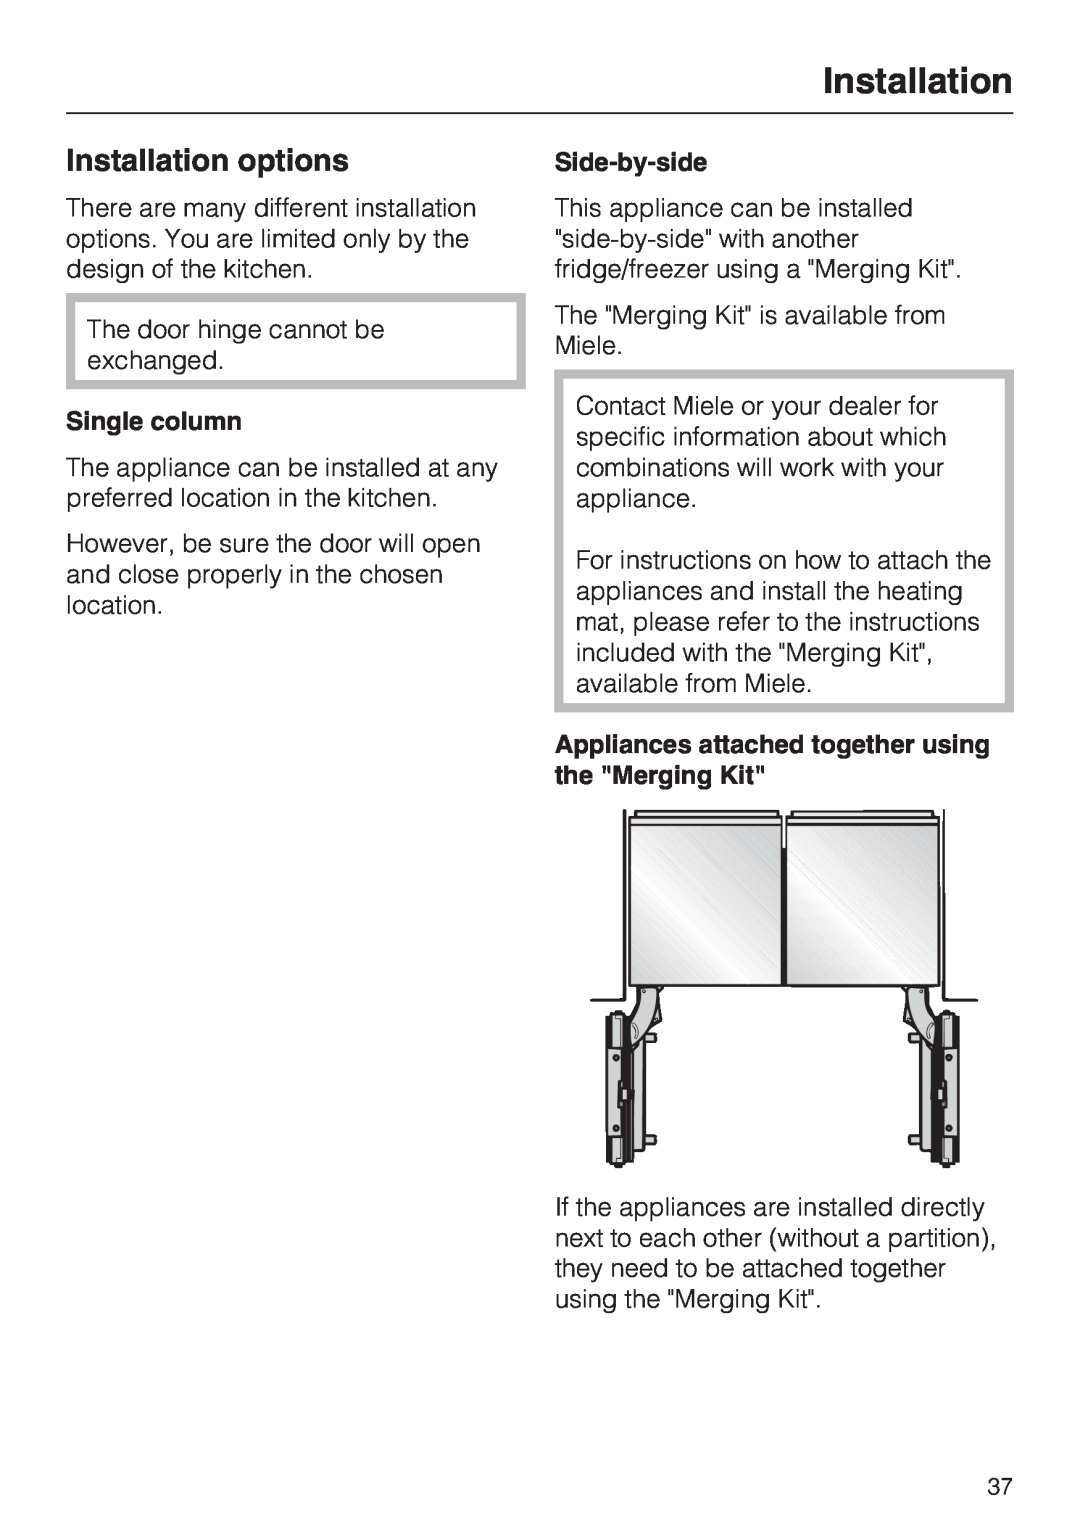 Miele KWT1601VI Installation options, Single column, Side-by-side, Appliances attached together using the Merging Kit 